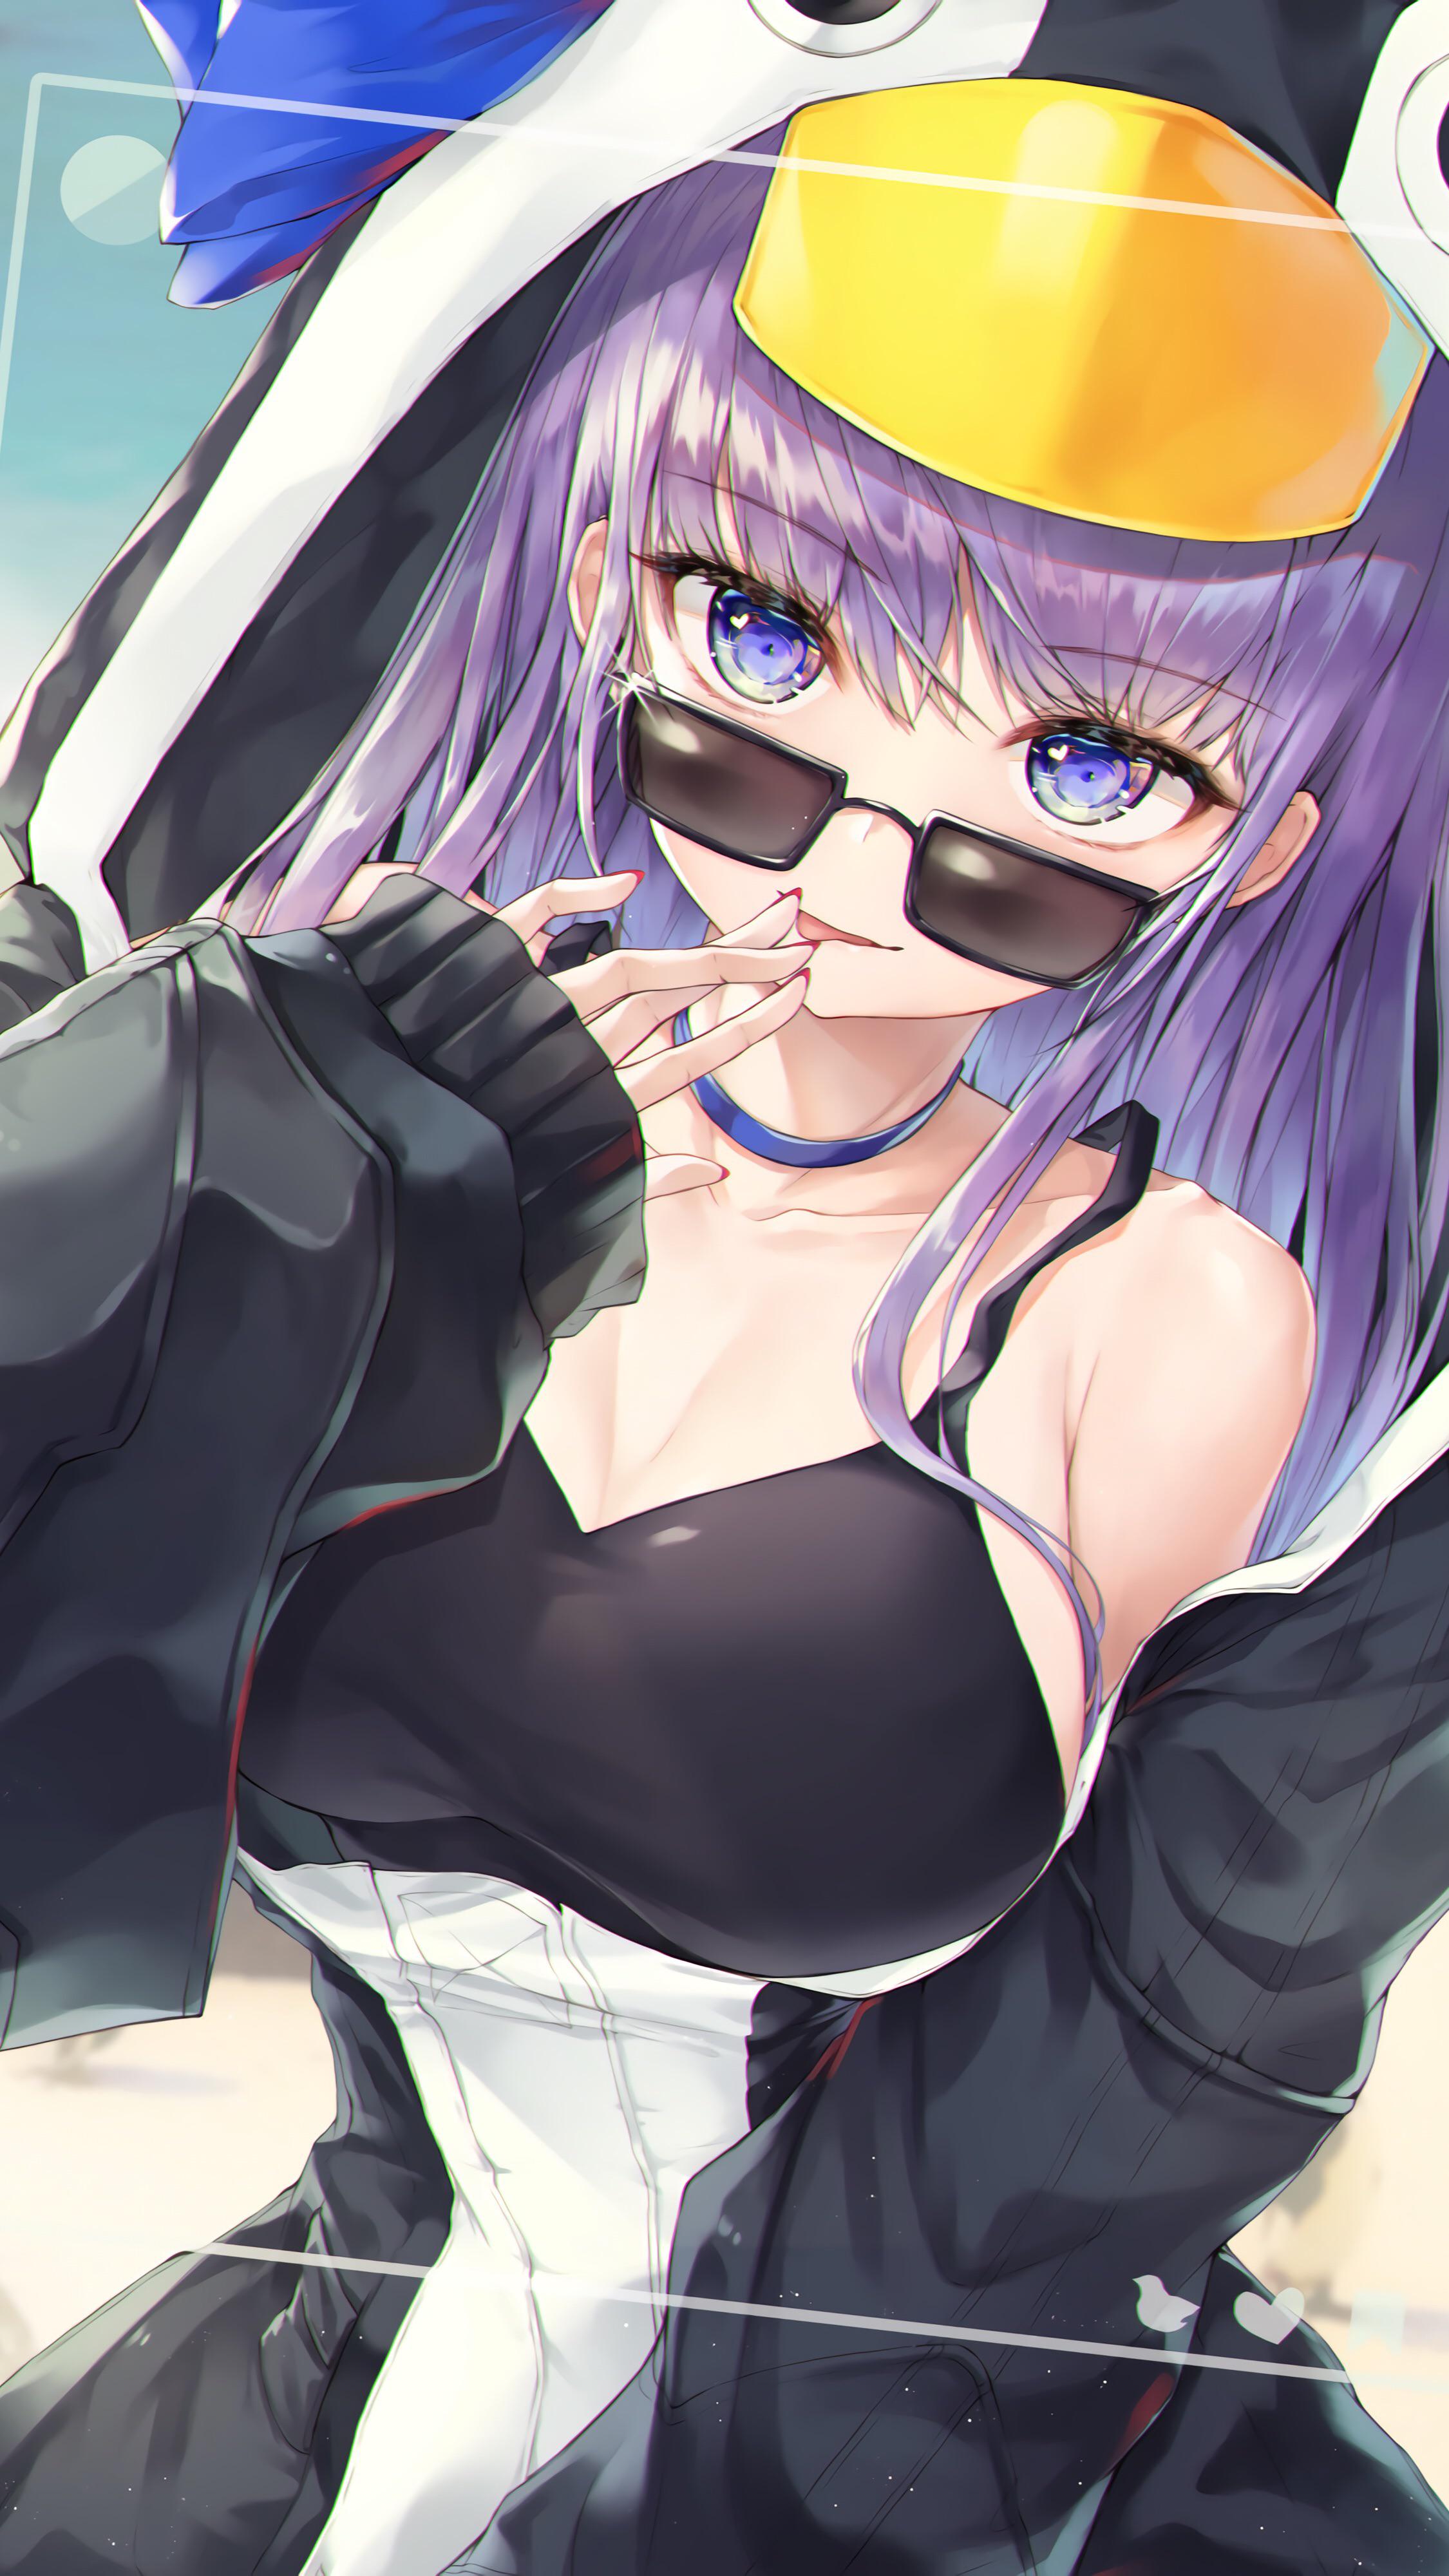 Anime 2250x4000 anime anime girls digital art artwork portrait display 2D Meltlilith Fate/Grand Order Fate/Extra CCC Fate series GiO purple hair blue eyes glasses tongue out bikini top open jacket